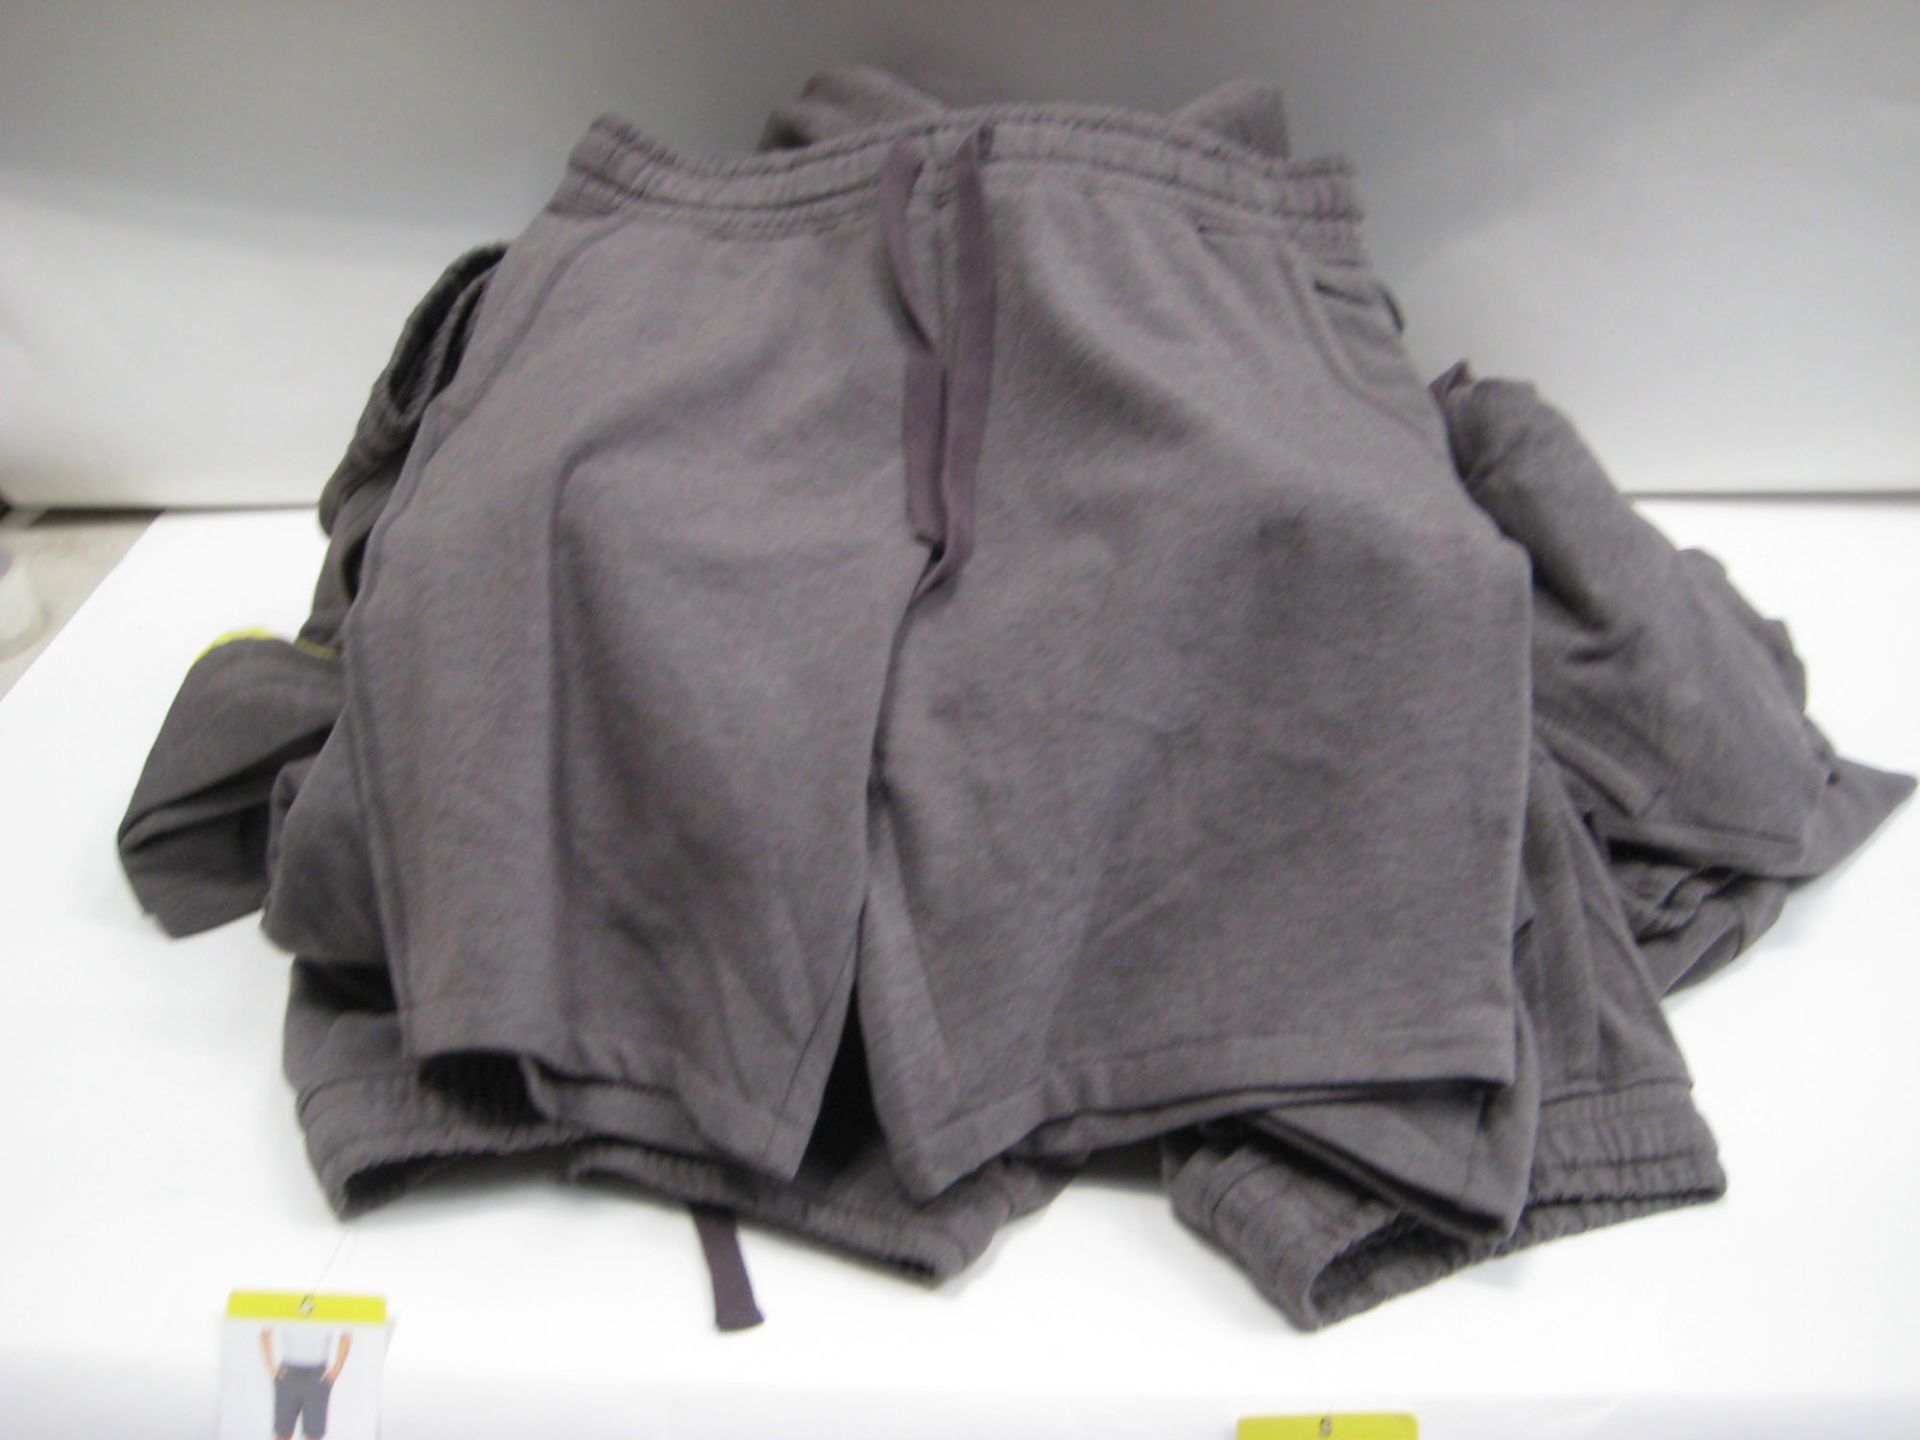 Bag containing approx 25 original Jacks manufacturing company sports shorts in grey